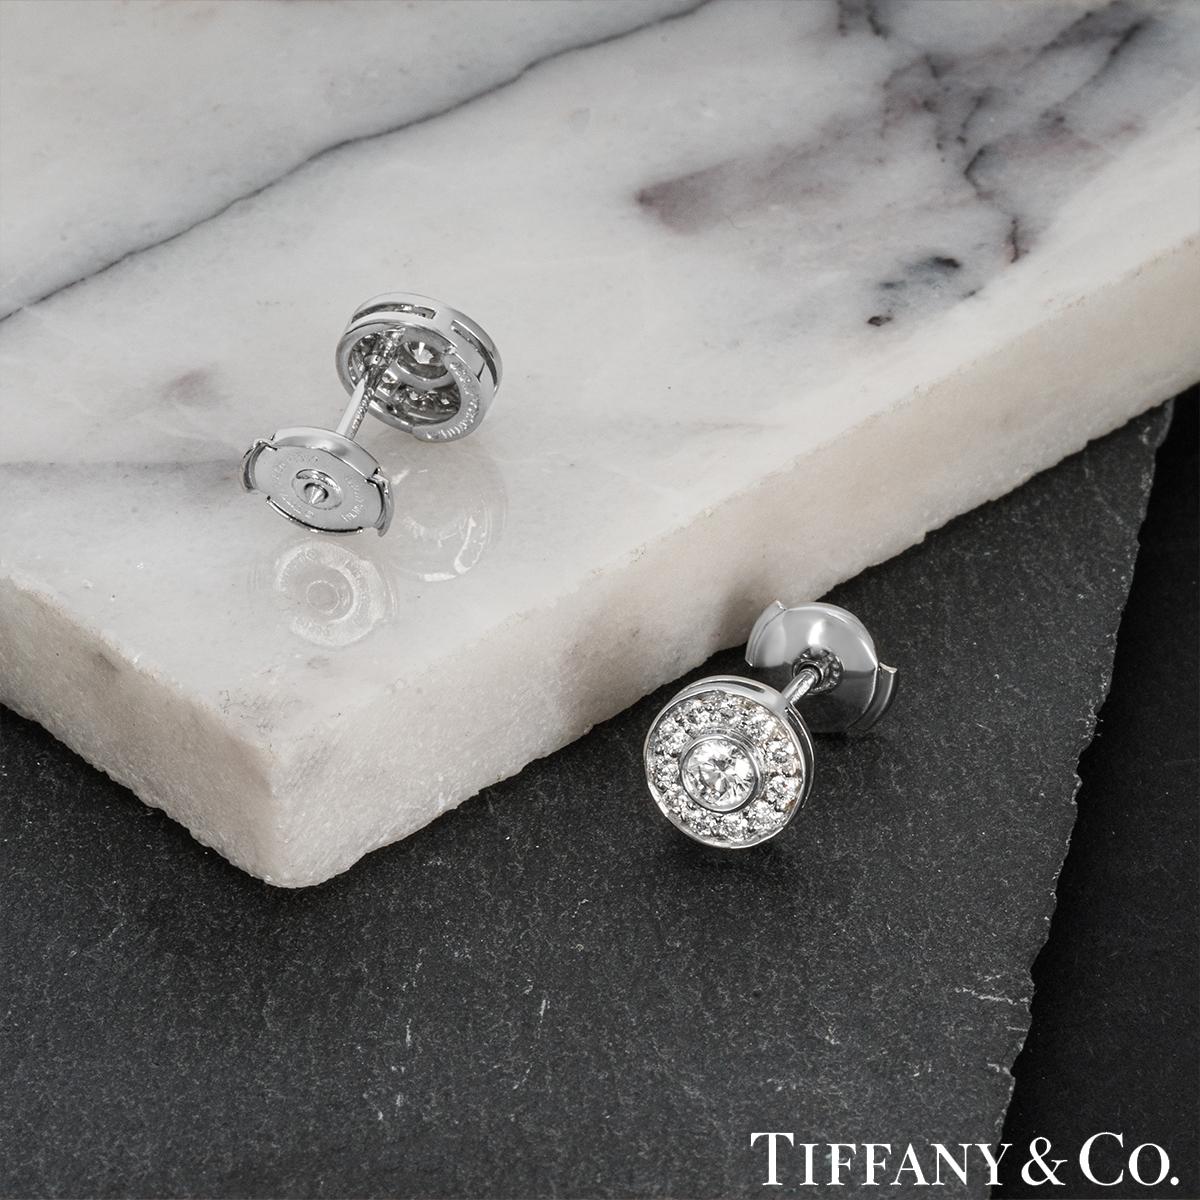 Tiffany & Co. Platinum Diamond Circlet Stud Earrings In Excellent Condition For Sale In London, GB